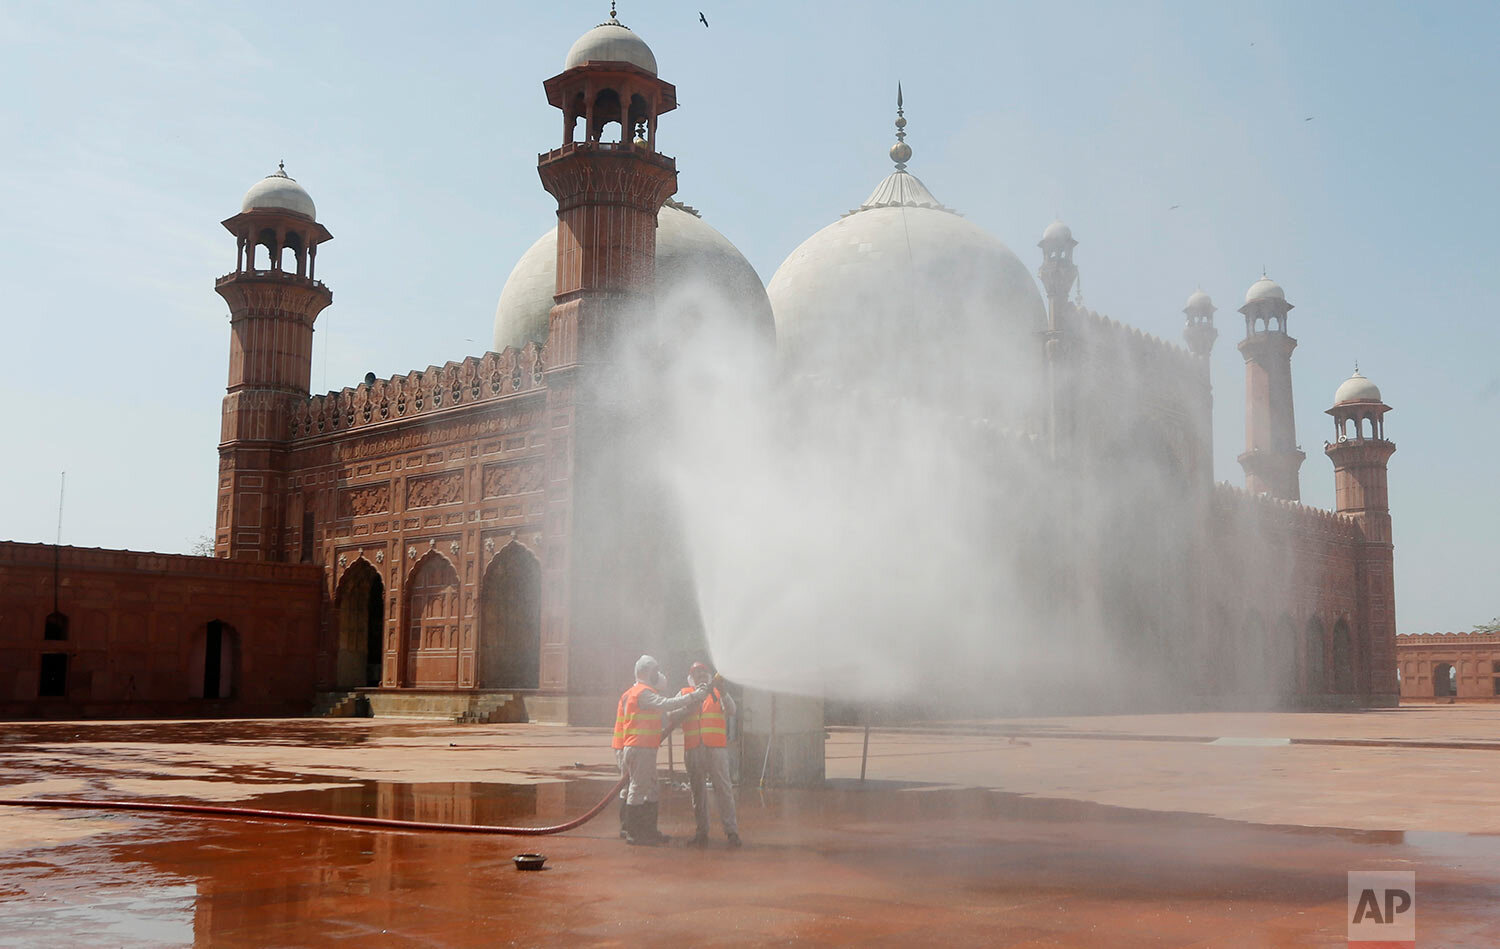  Volunteers disinfect the historical Badshahi Mosque ahead of the Muslim fasting month of Ramadan, in Lahore, Pakistan, Wednesday, April 22, 2020.  (AP Photo/K.M. Chaudhry) 